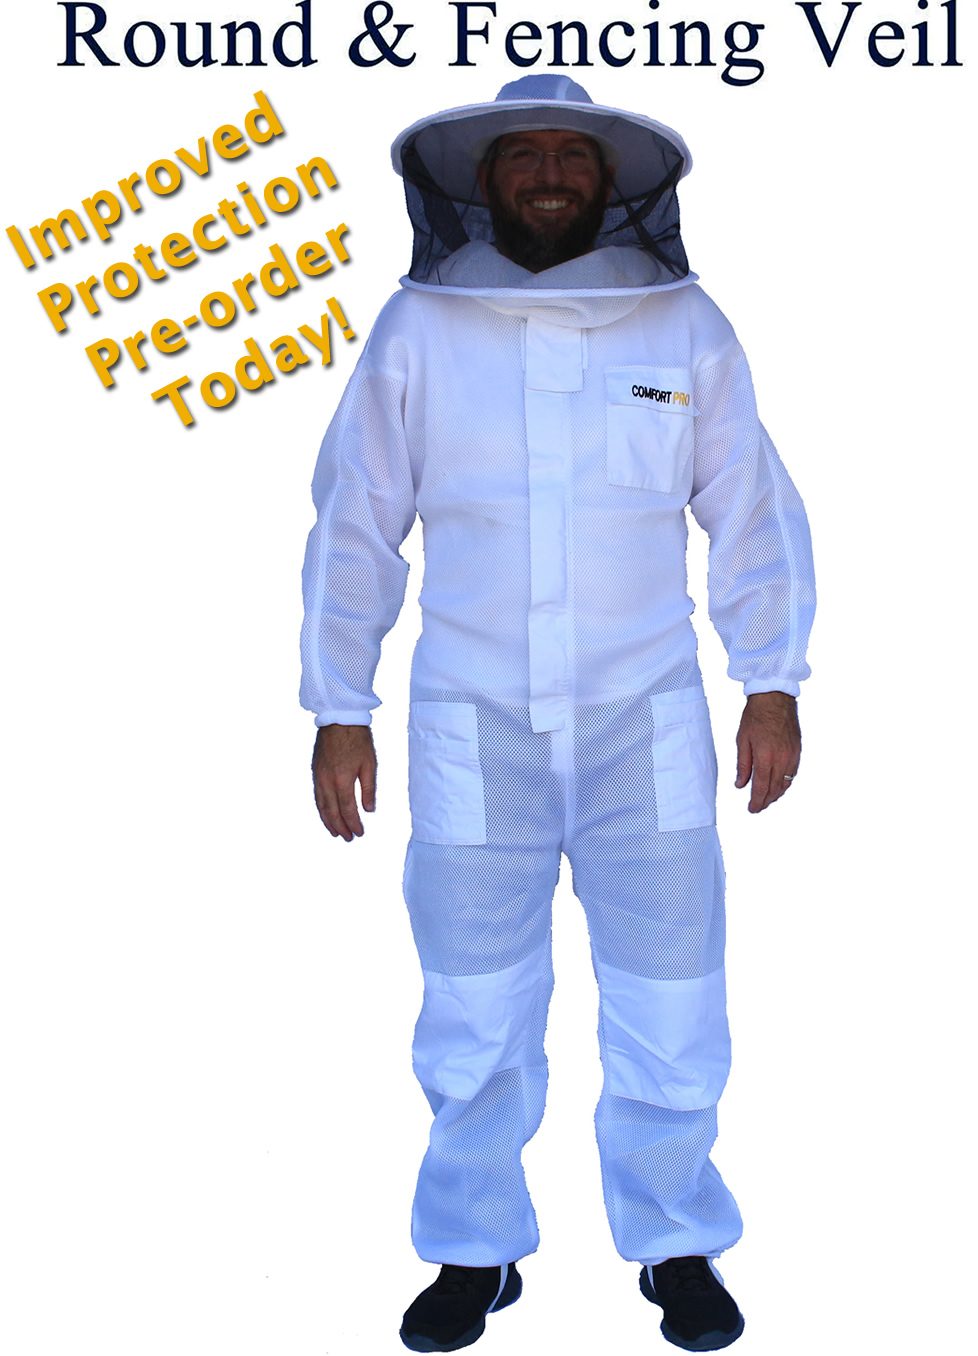 Pre-Order – Ventilated Bee Suit with Round Veil and Fencing Veil – Full Suit